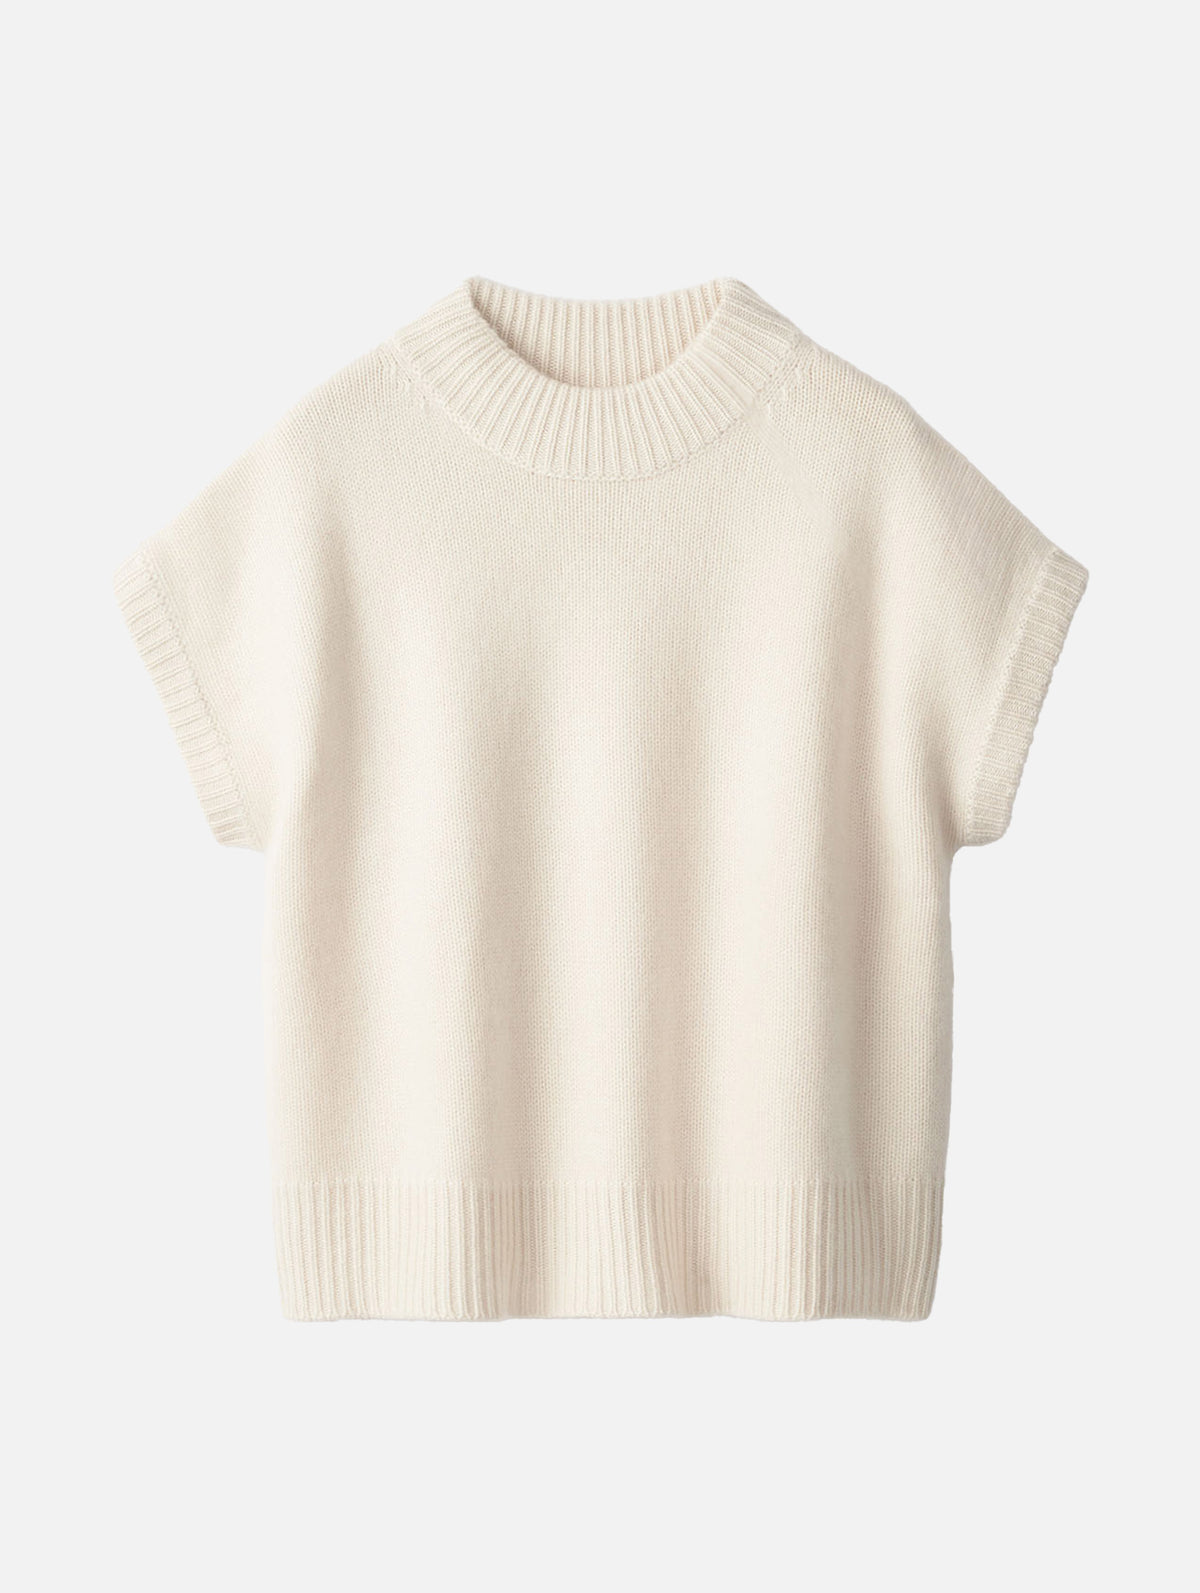 Round Neck Cashmere Top in Feather White